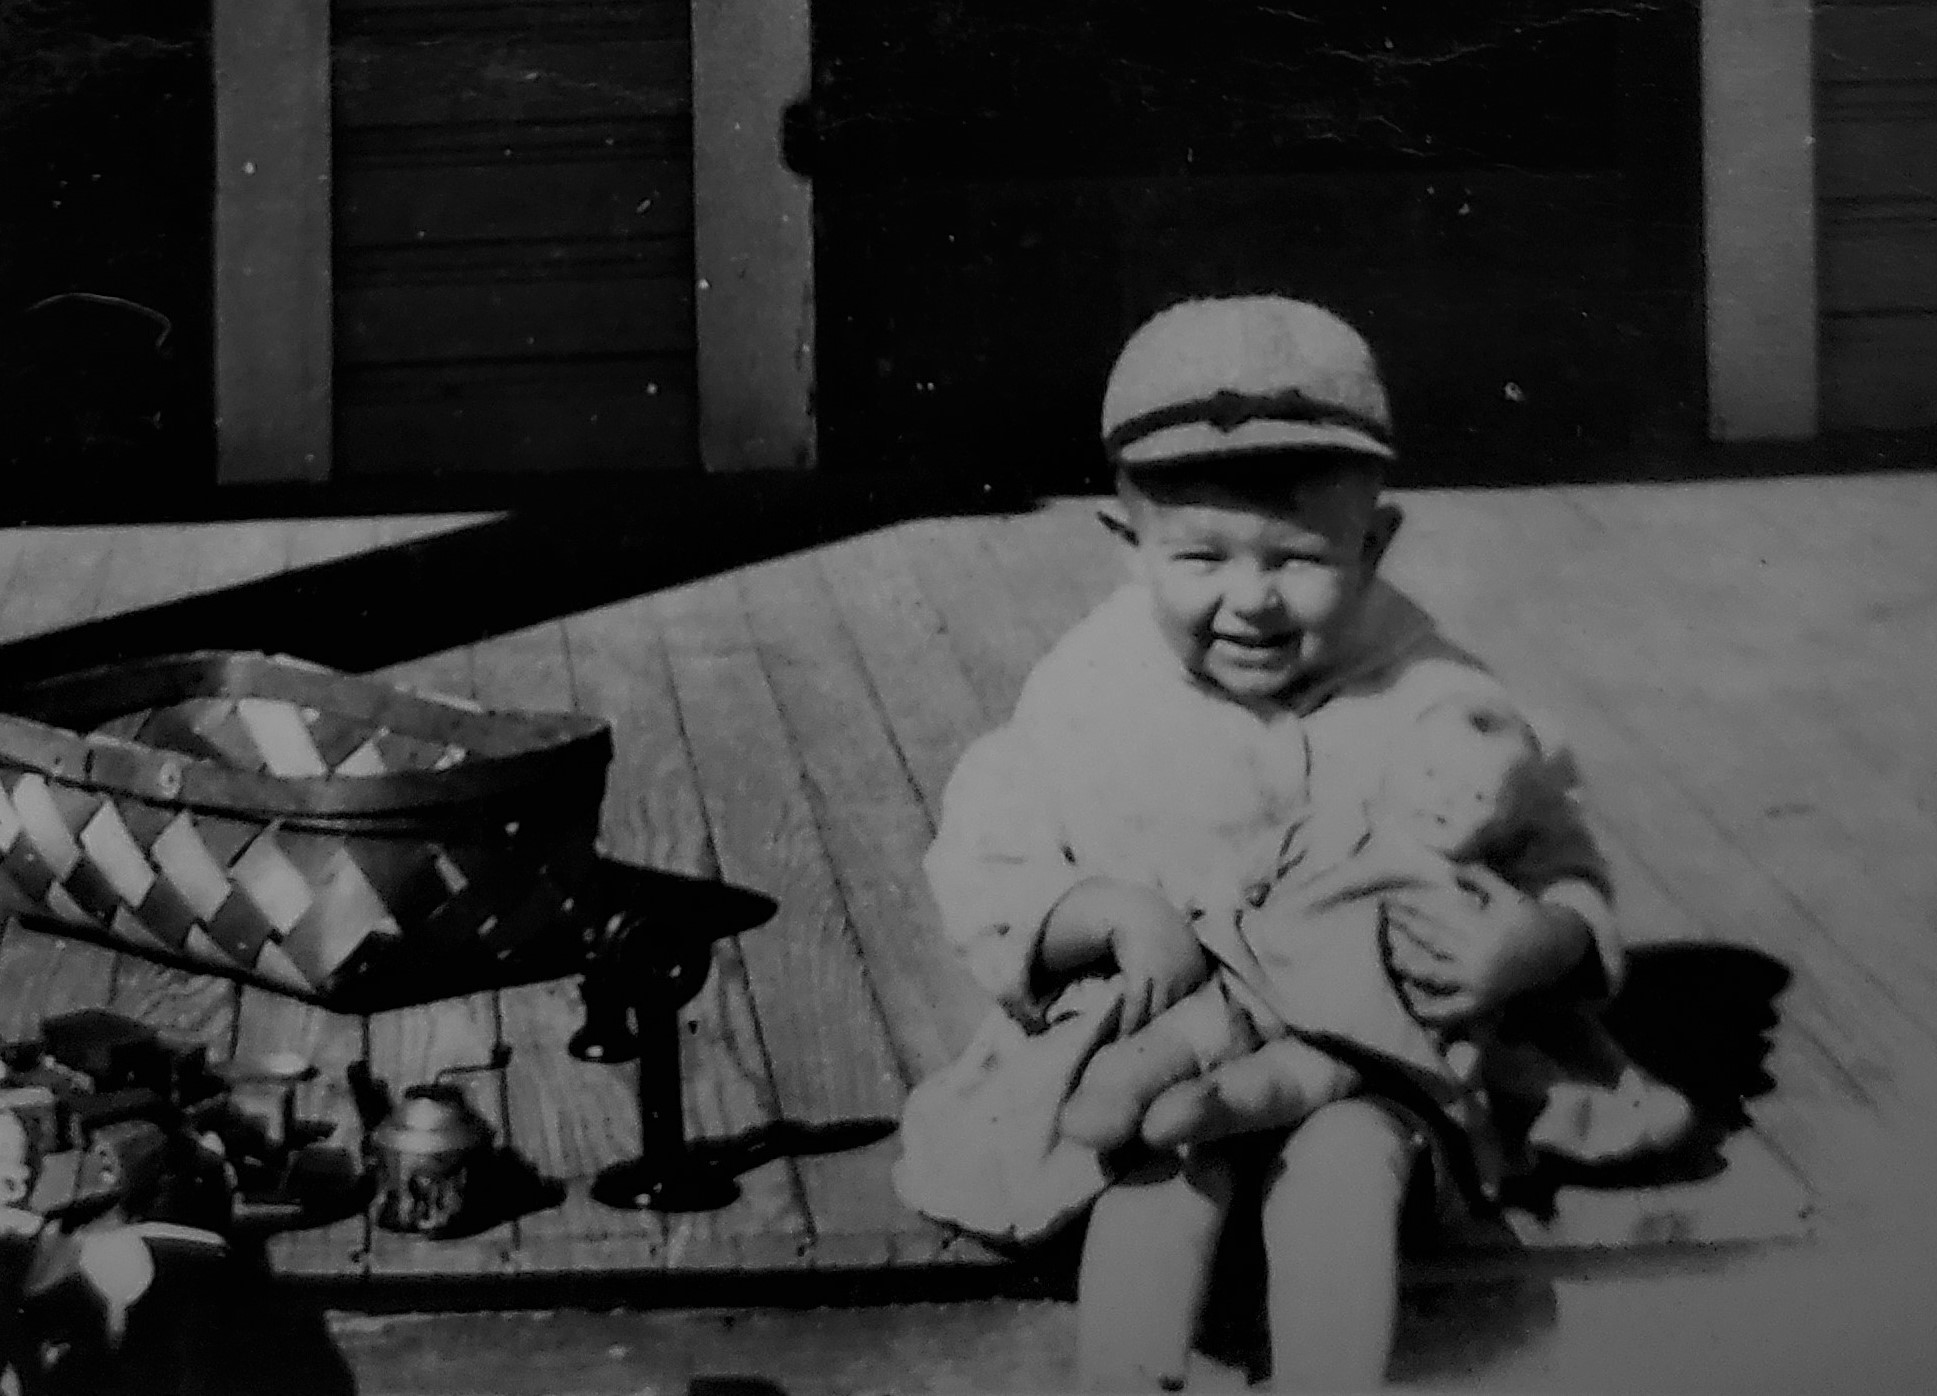 1927-2 Little Rock Quinton with toys holding doll (2)